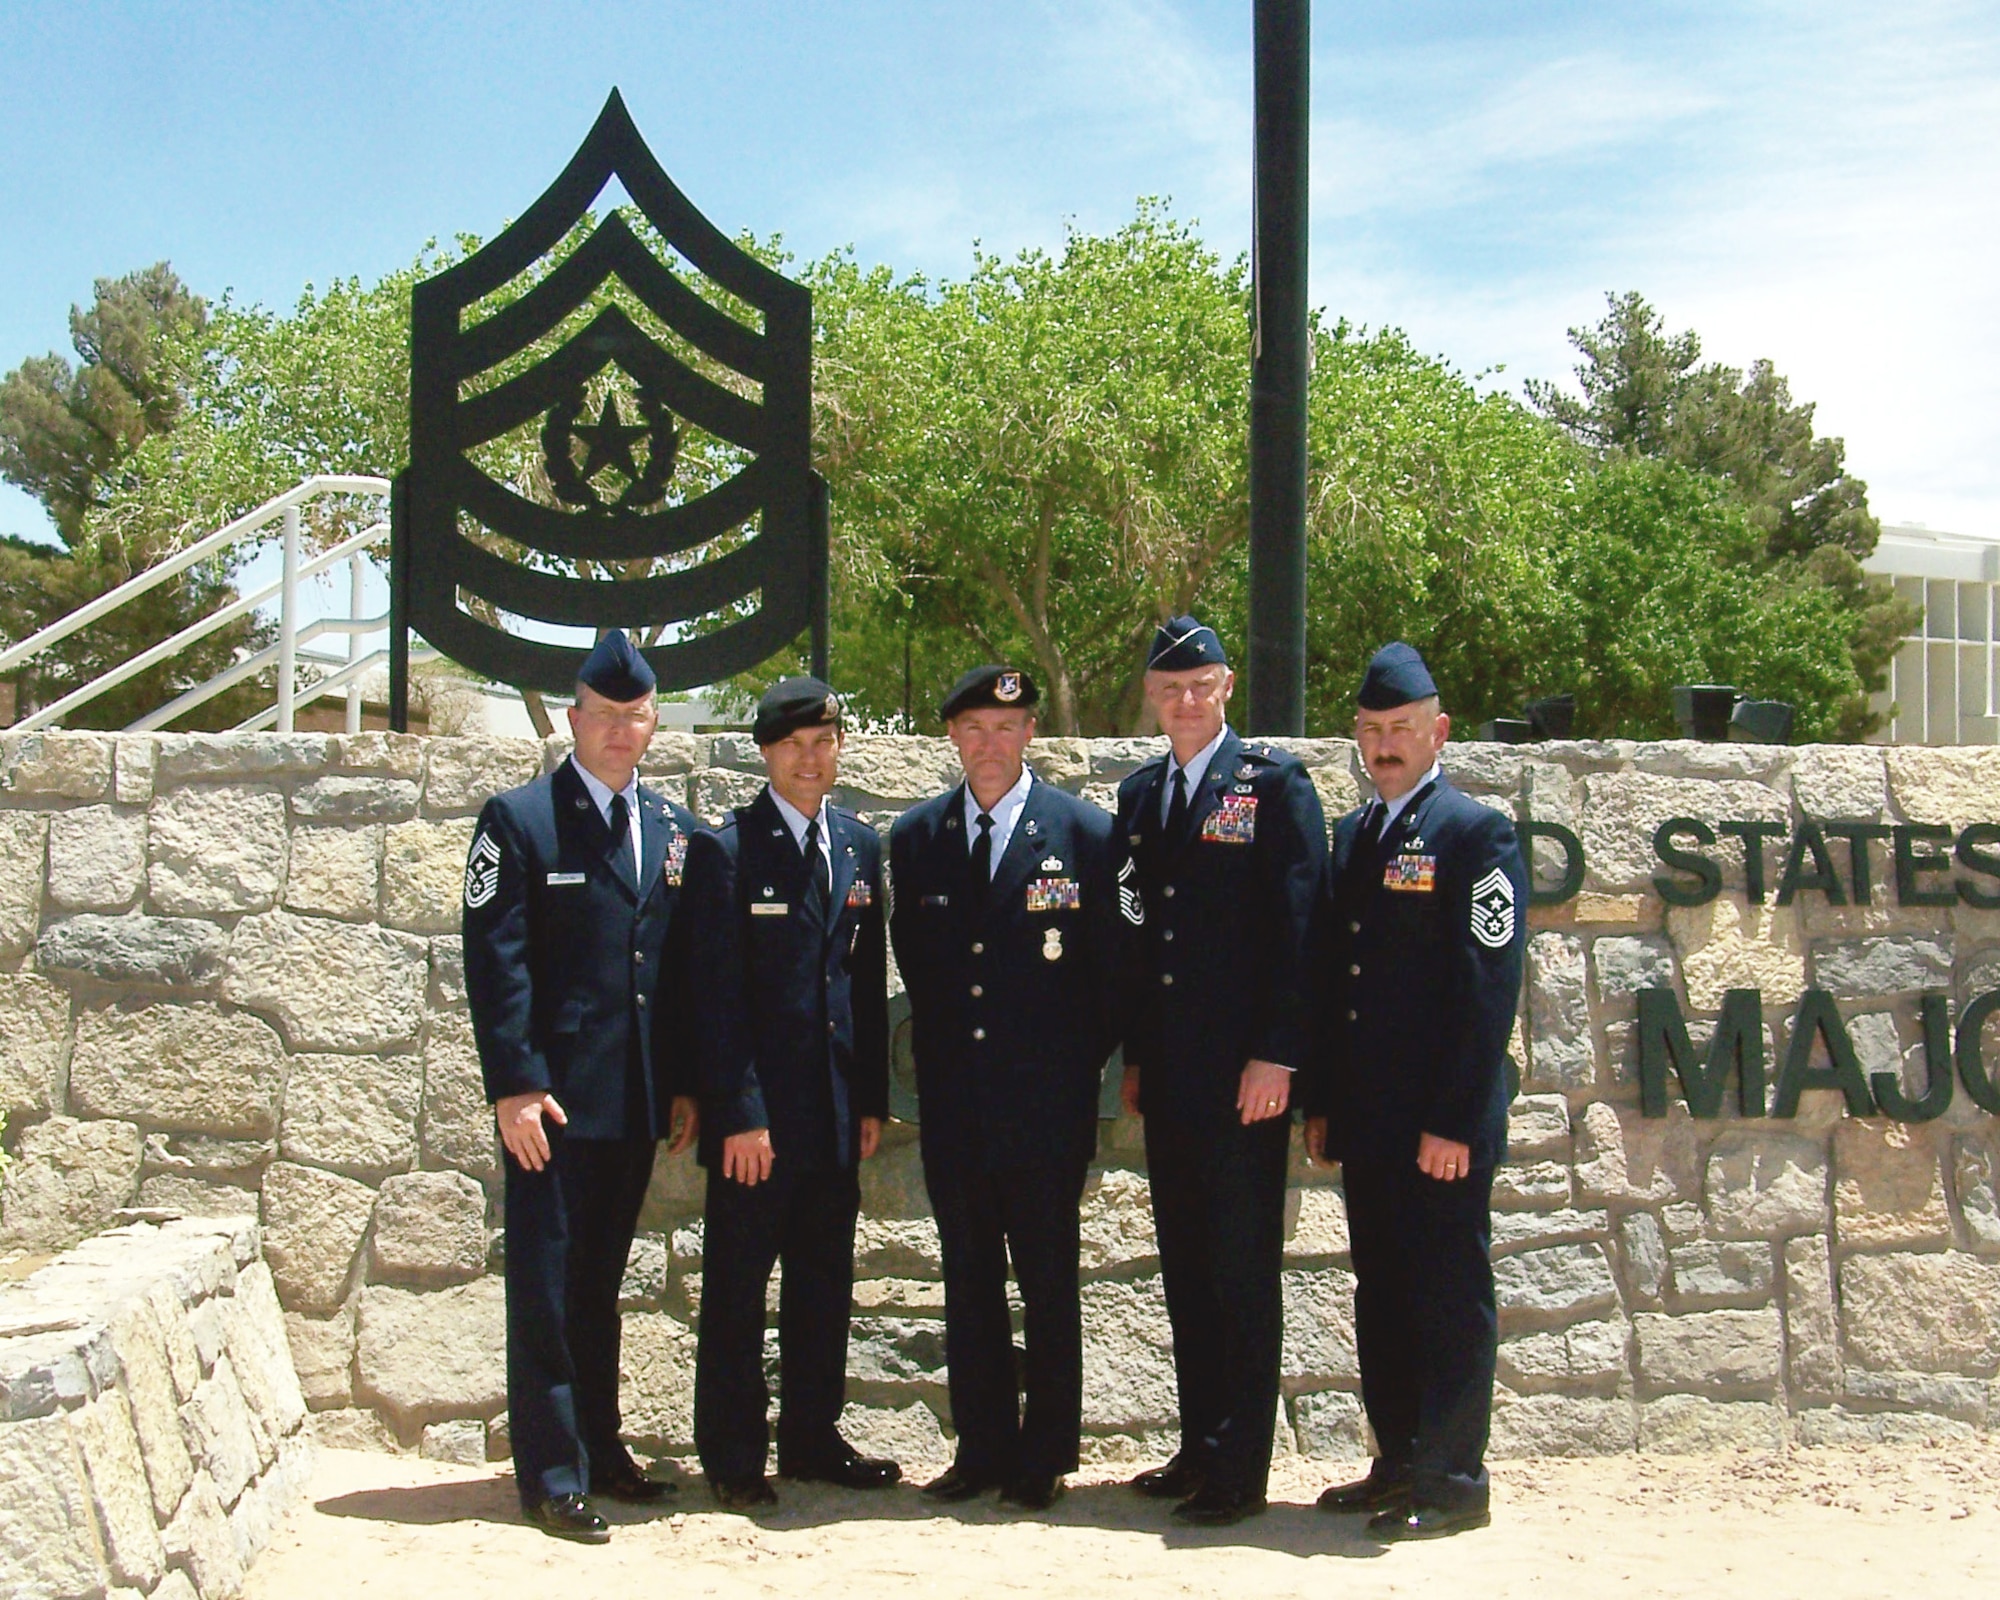 Senior Leaders of the Oregon Air National Guard pose for a group post-graduation photograph with Senior Master Sgt. Christopher Roper (center), after his graduation ceremony from the U.S. Army Sergeants Major academy on June 17, 2010 at Ft. Bliss, Tex.  Senior Master Sgt. Roper was the first Air National Guard member to graduate from the U.S. Army Sergeants Major academy. With Roper are (left to right) Command Chief Master Sgt. James Hotaling, 142nd Fighter Wing Command Chief,  Major Frank Page, Security Forces Commander 142nd Fighter Wing, Senior Master Sgt. Christopher Roper, Brig. General Stephen Gregg, Oregon Air National Guard Commander and Command Chief Master Sgt. Mark Russell, Oregon Air Guard State Command Chief. (Photograph courtesy of Senior Master Sgt. Christopher Roper)